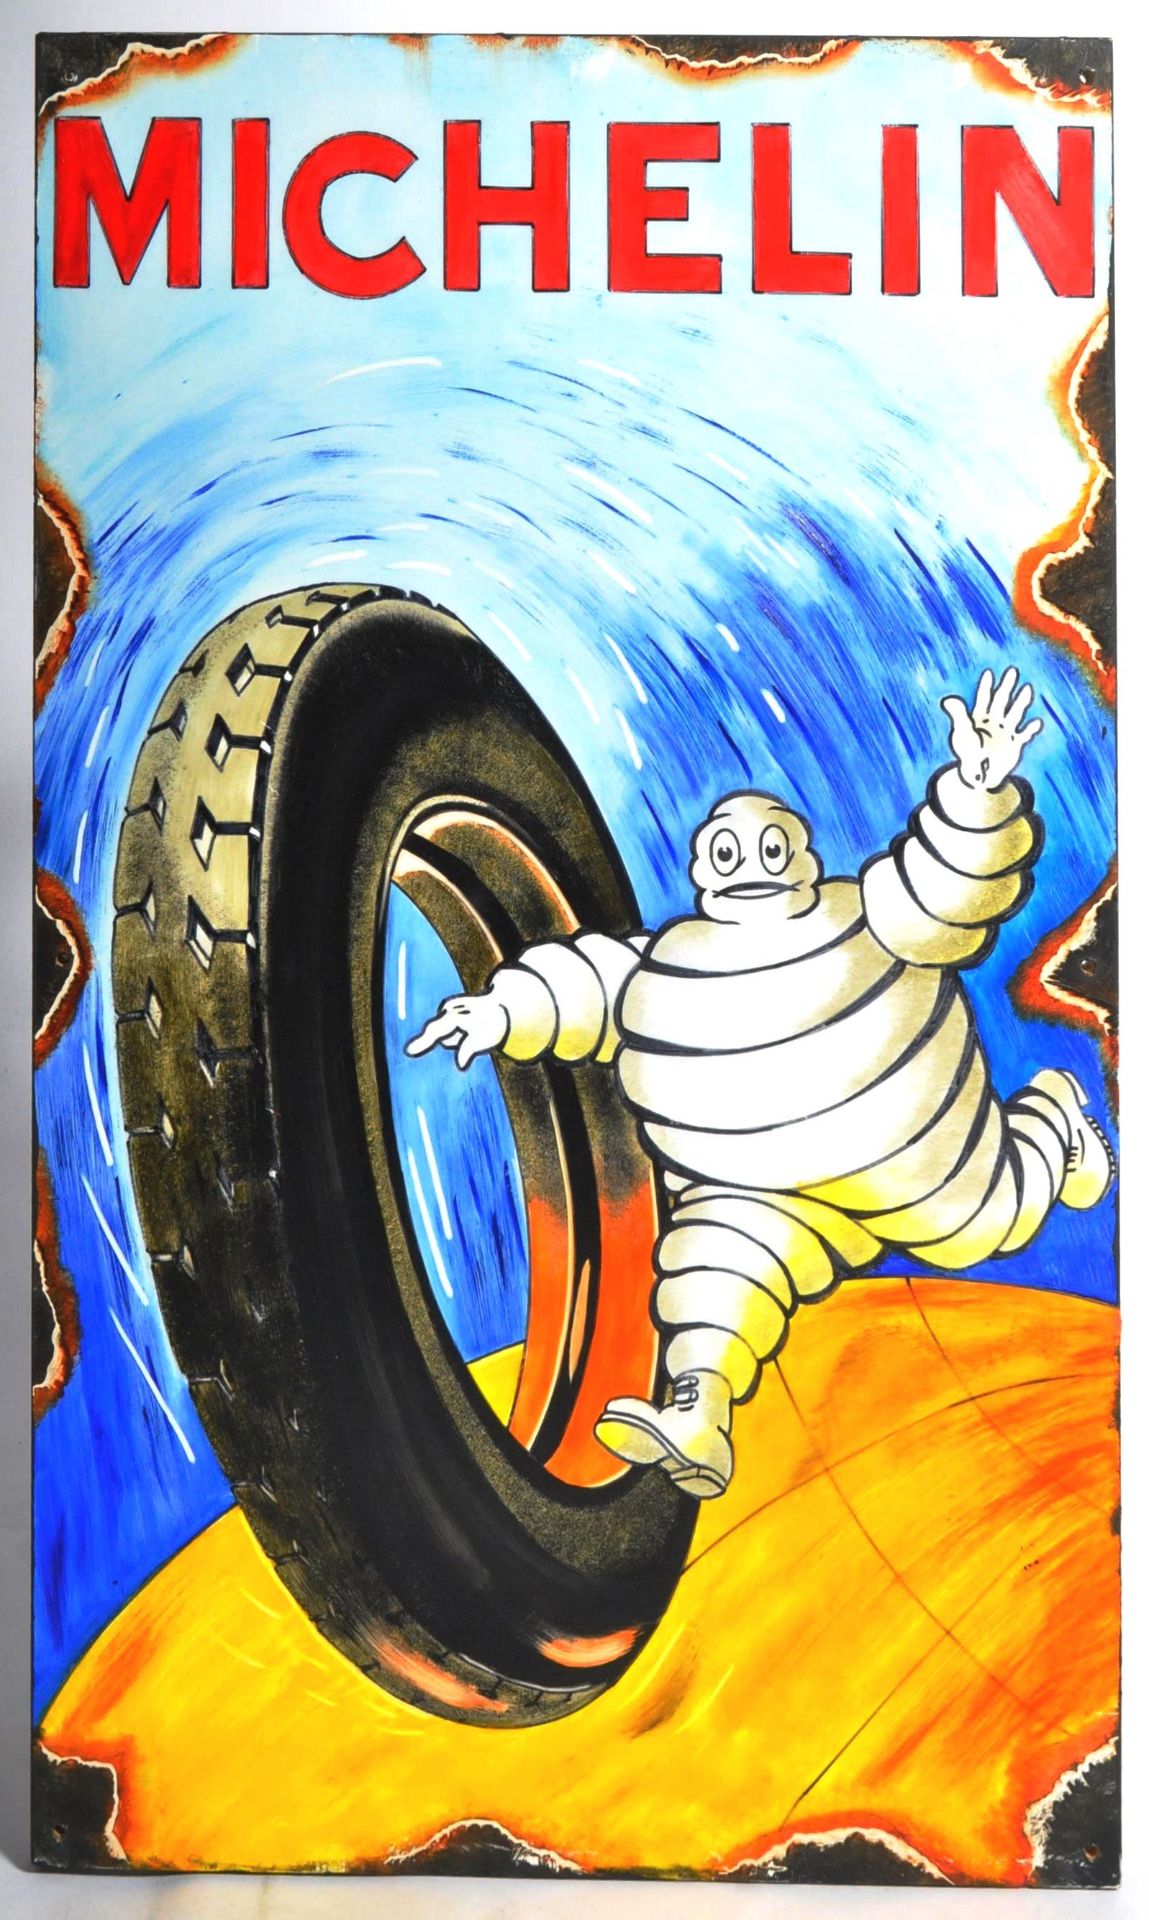 MICHELIN - ARTIST'S IMPRESSION OF A TRADITIONAL ENAMEL SIGN